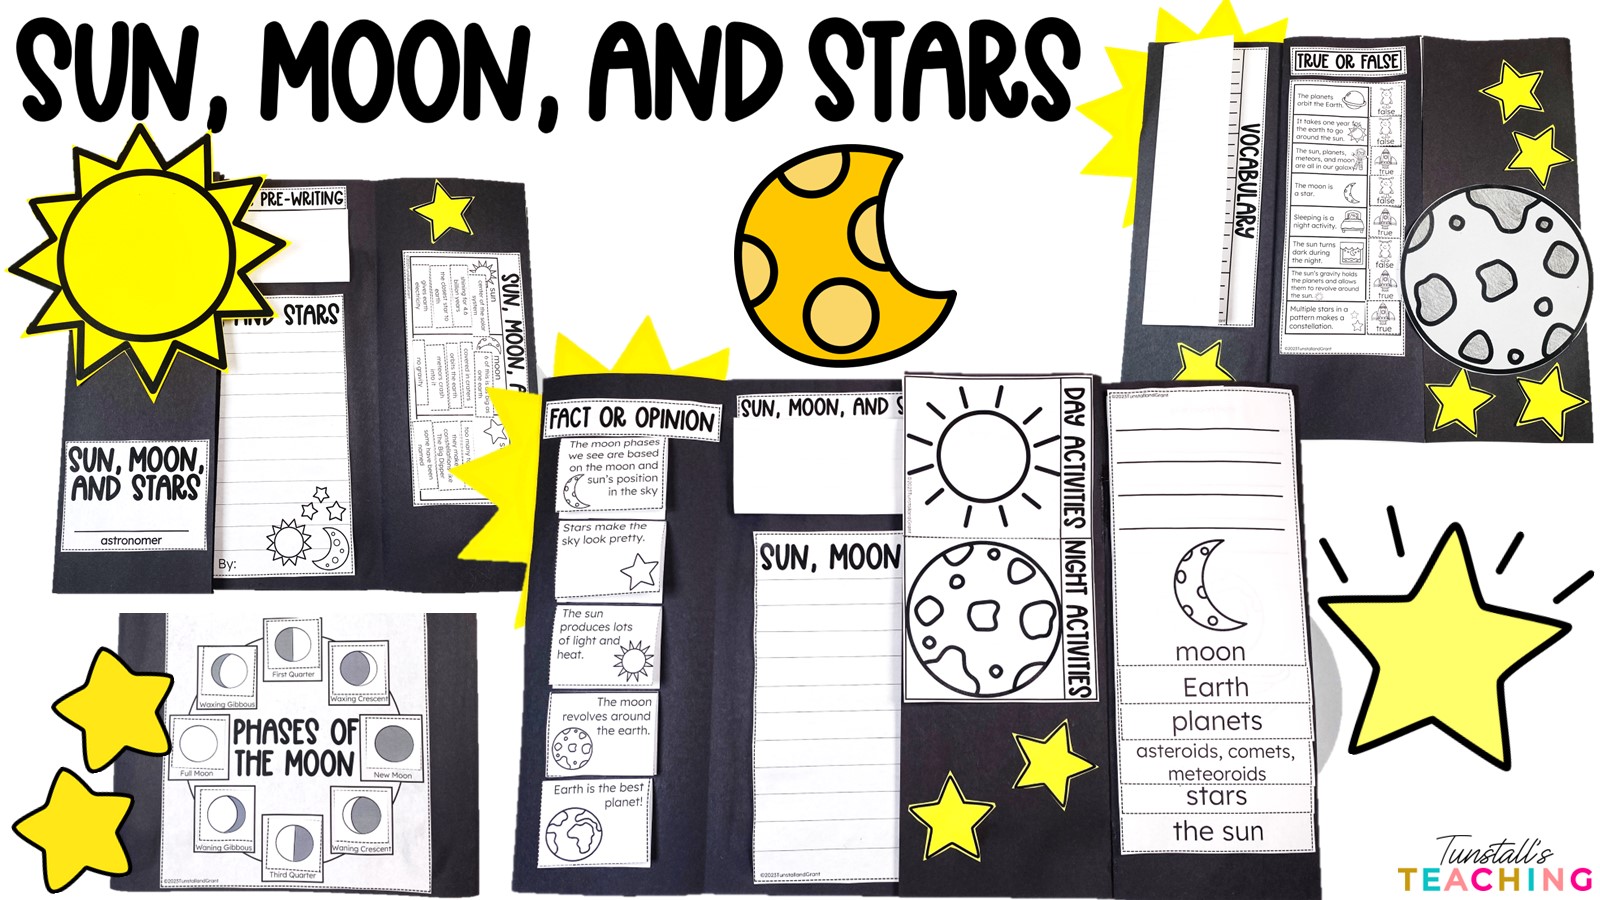 Learning About The Sun, Moon, and Stars